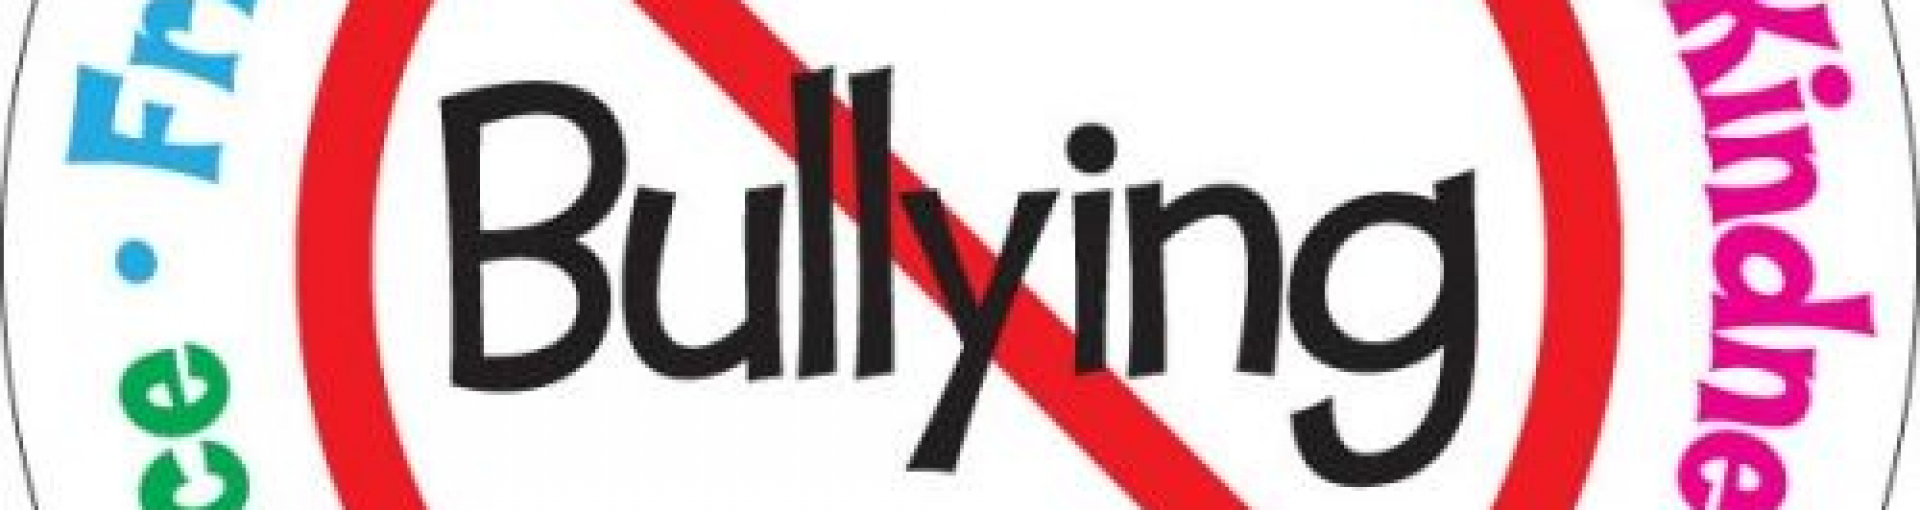 Architects Take Action to Reduce Bullying